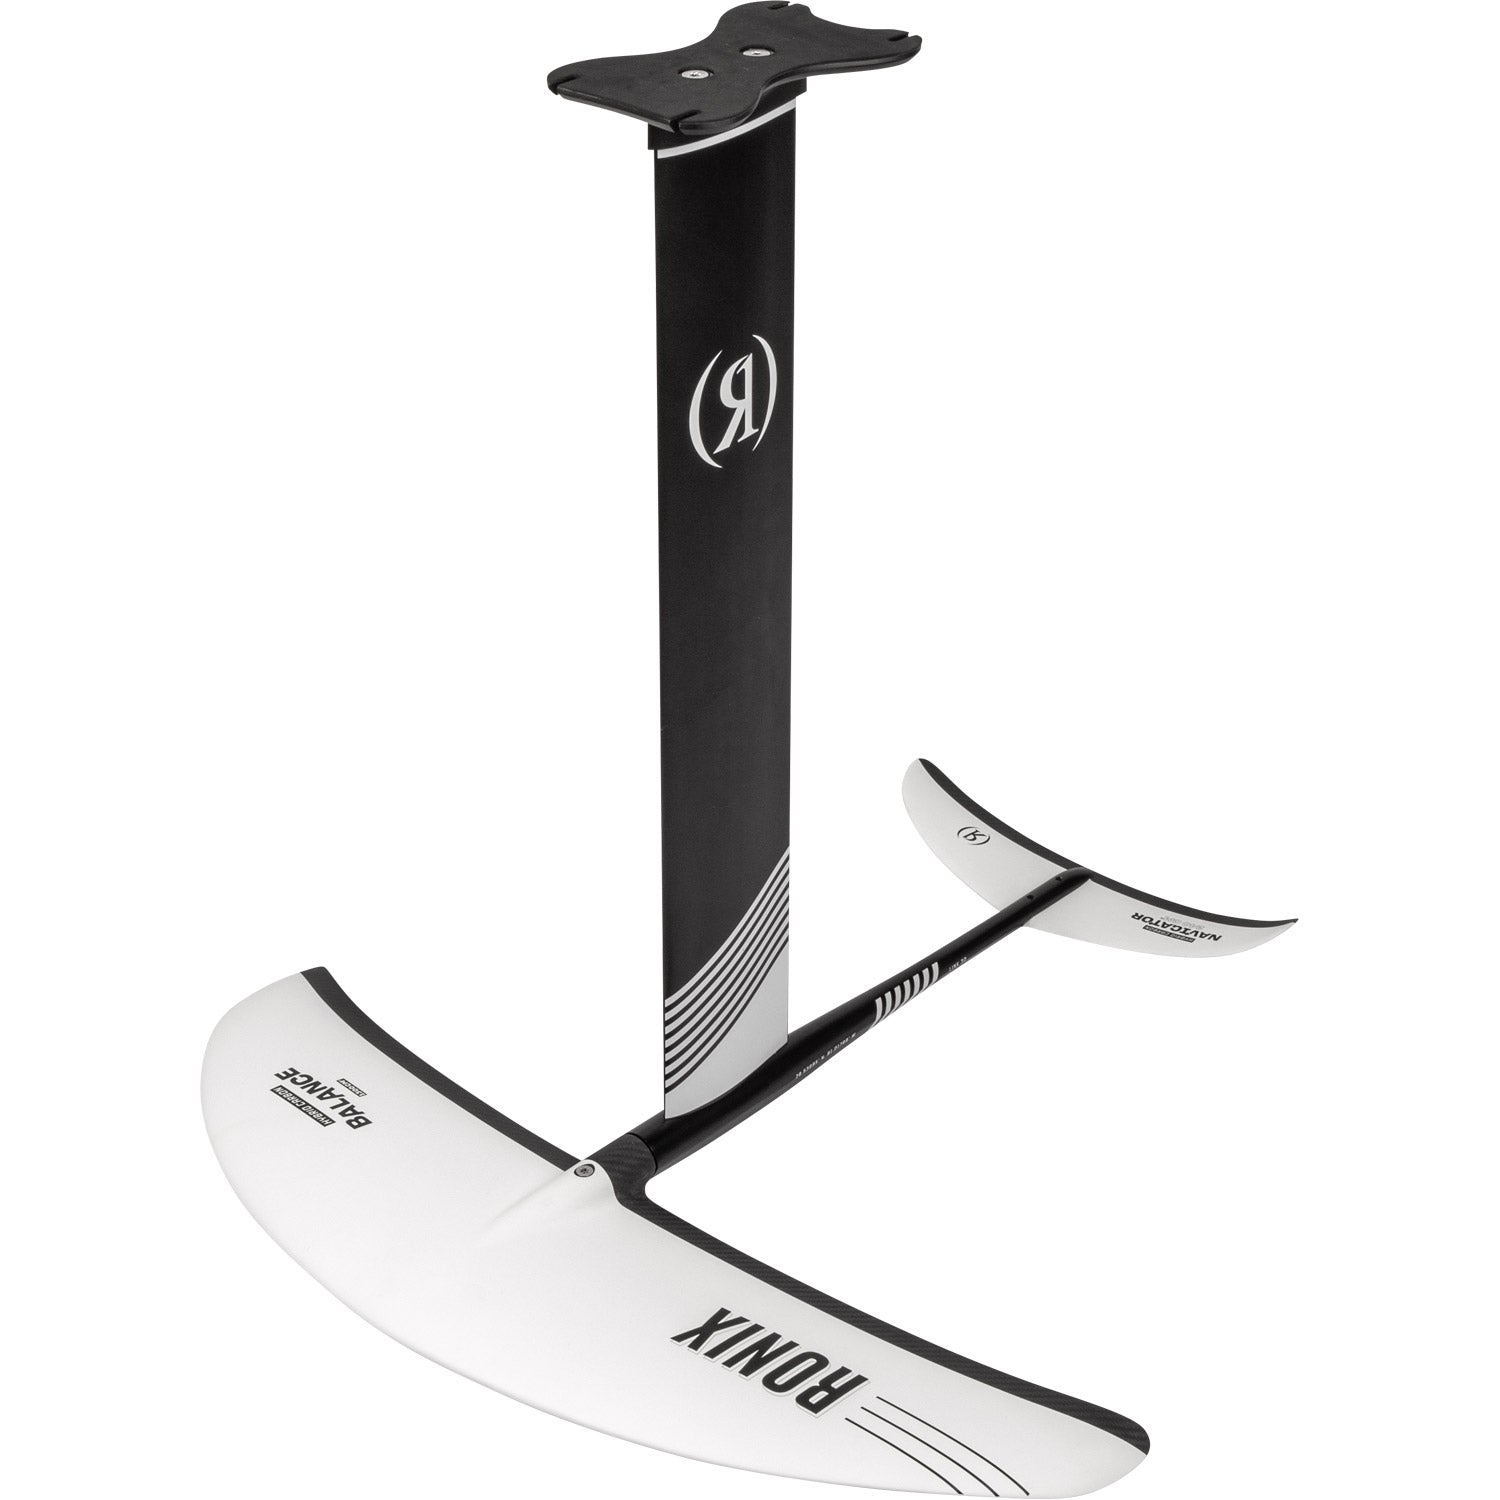 Advanced Hybrid Fluid 28" Mast w/ Balance Front Wing Package